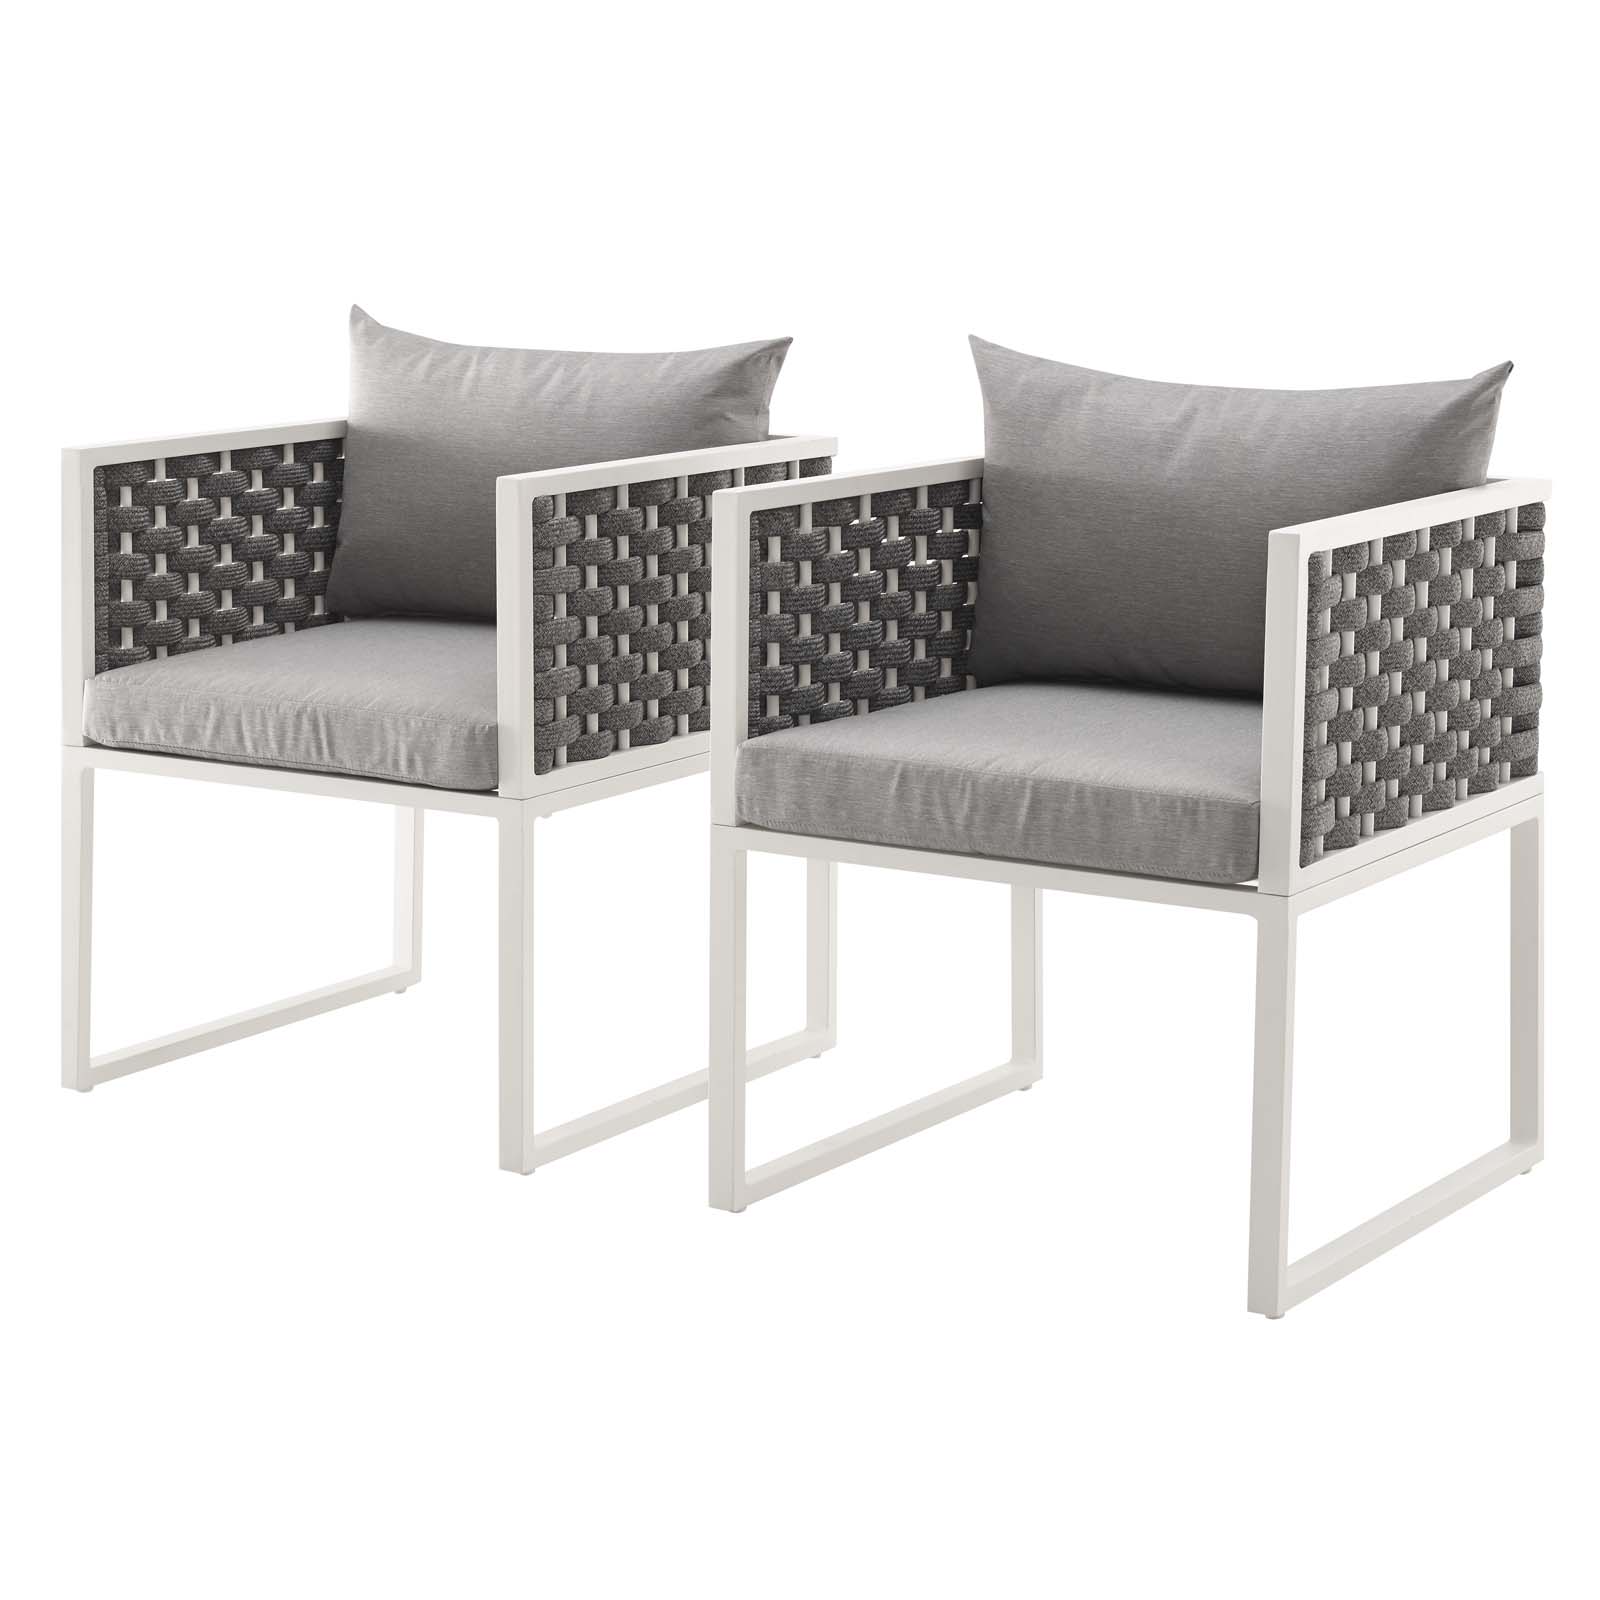 Modern Contemporary Urban Outdoor Patio Balcony Garden Furniture Side Dining Chair Armchair, Set of Two, Fabric Aluminium, White Grey Gray - image 1 of 6